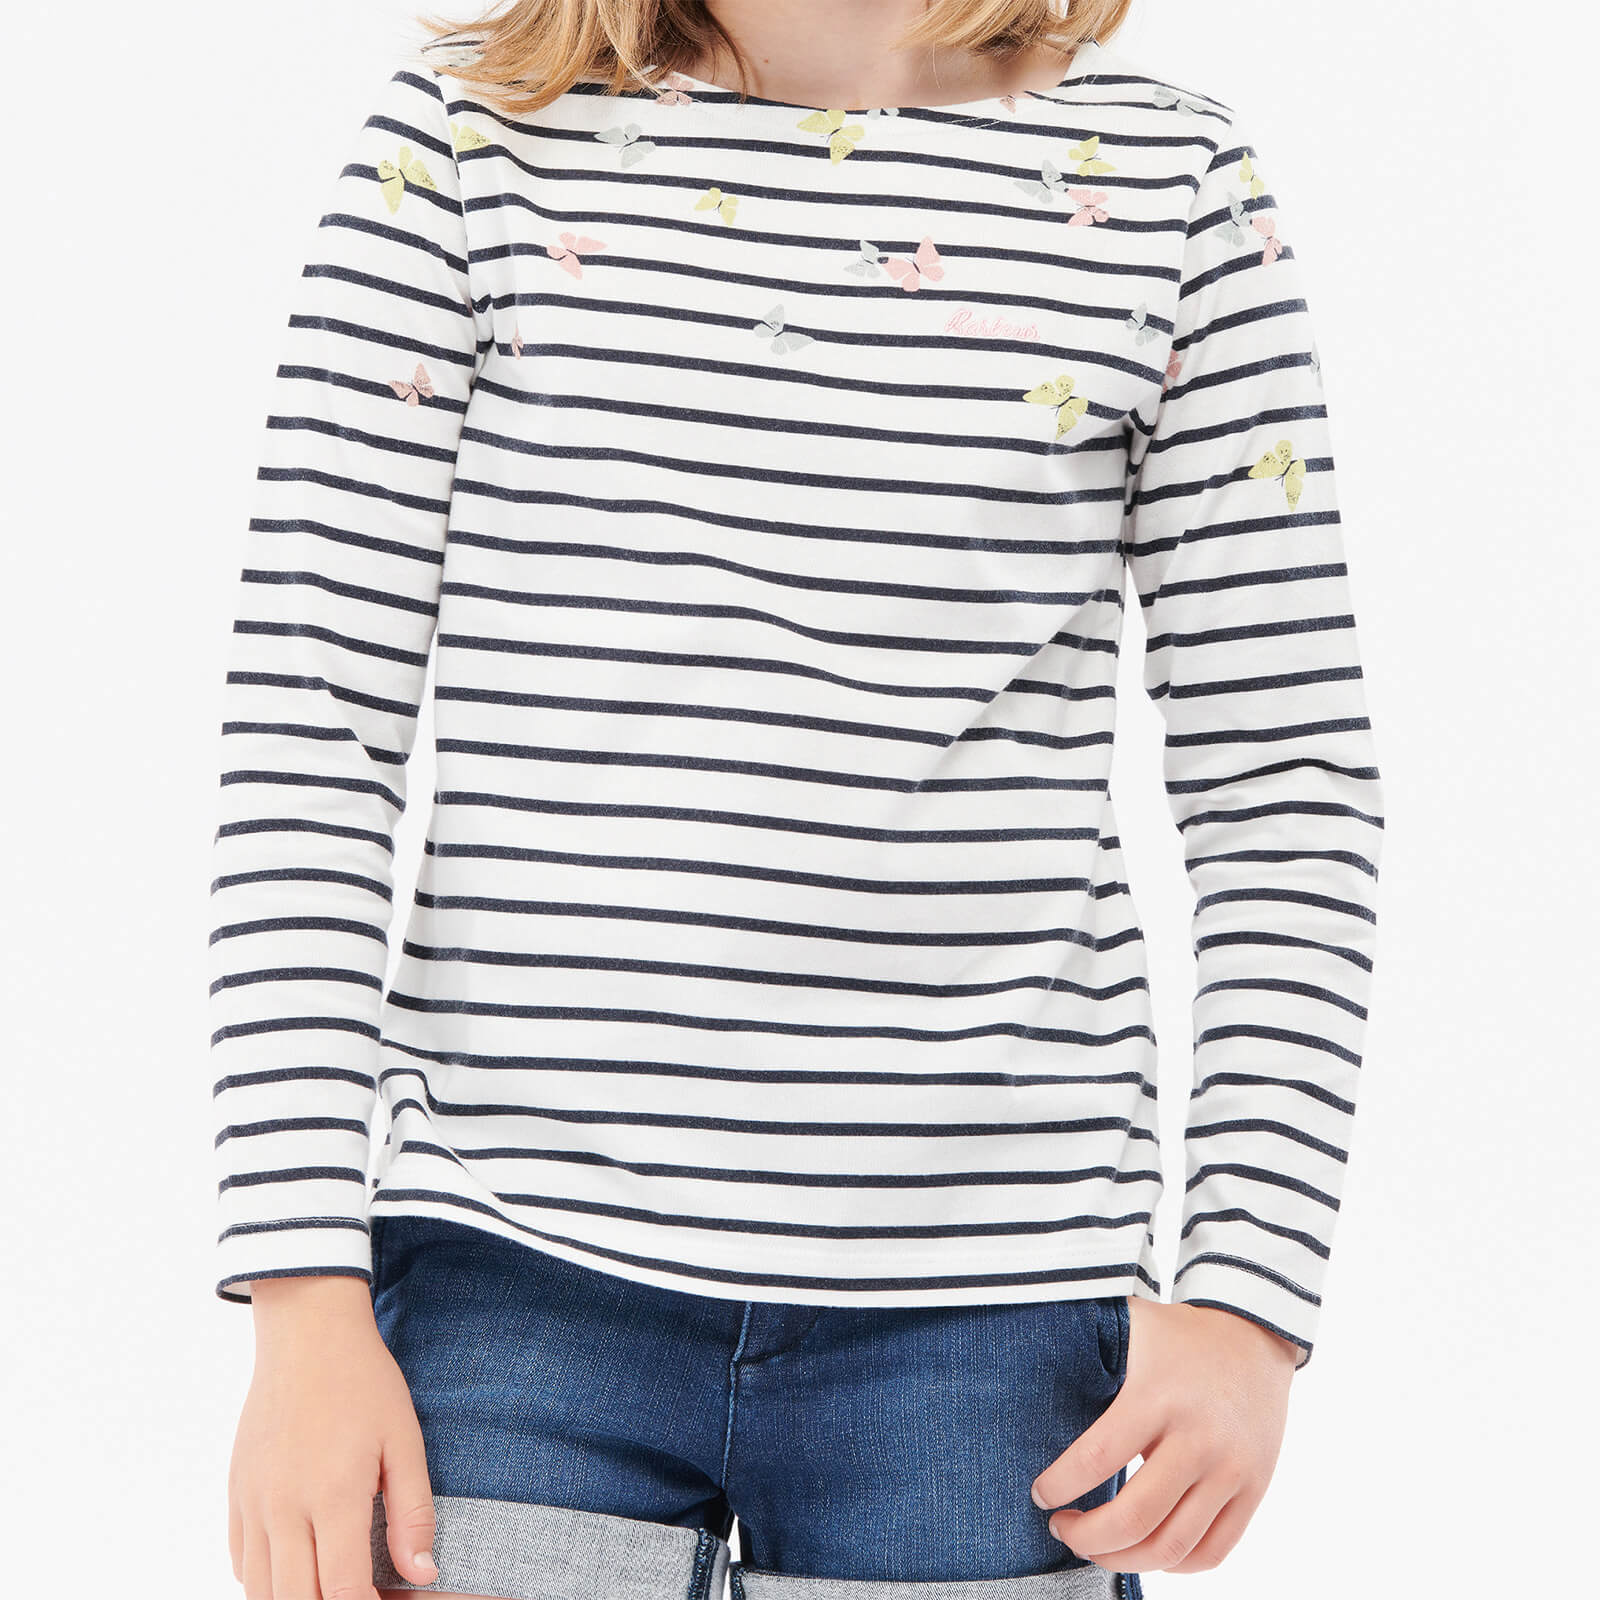 Barbour Girls' Bradley Striped Top - Off White -  8-9 Years